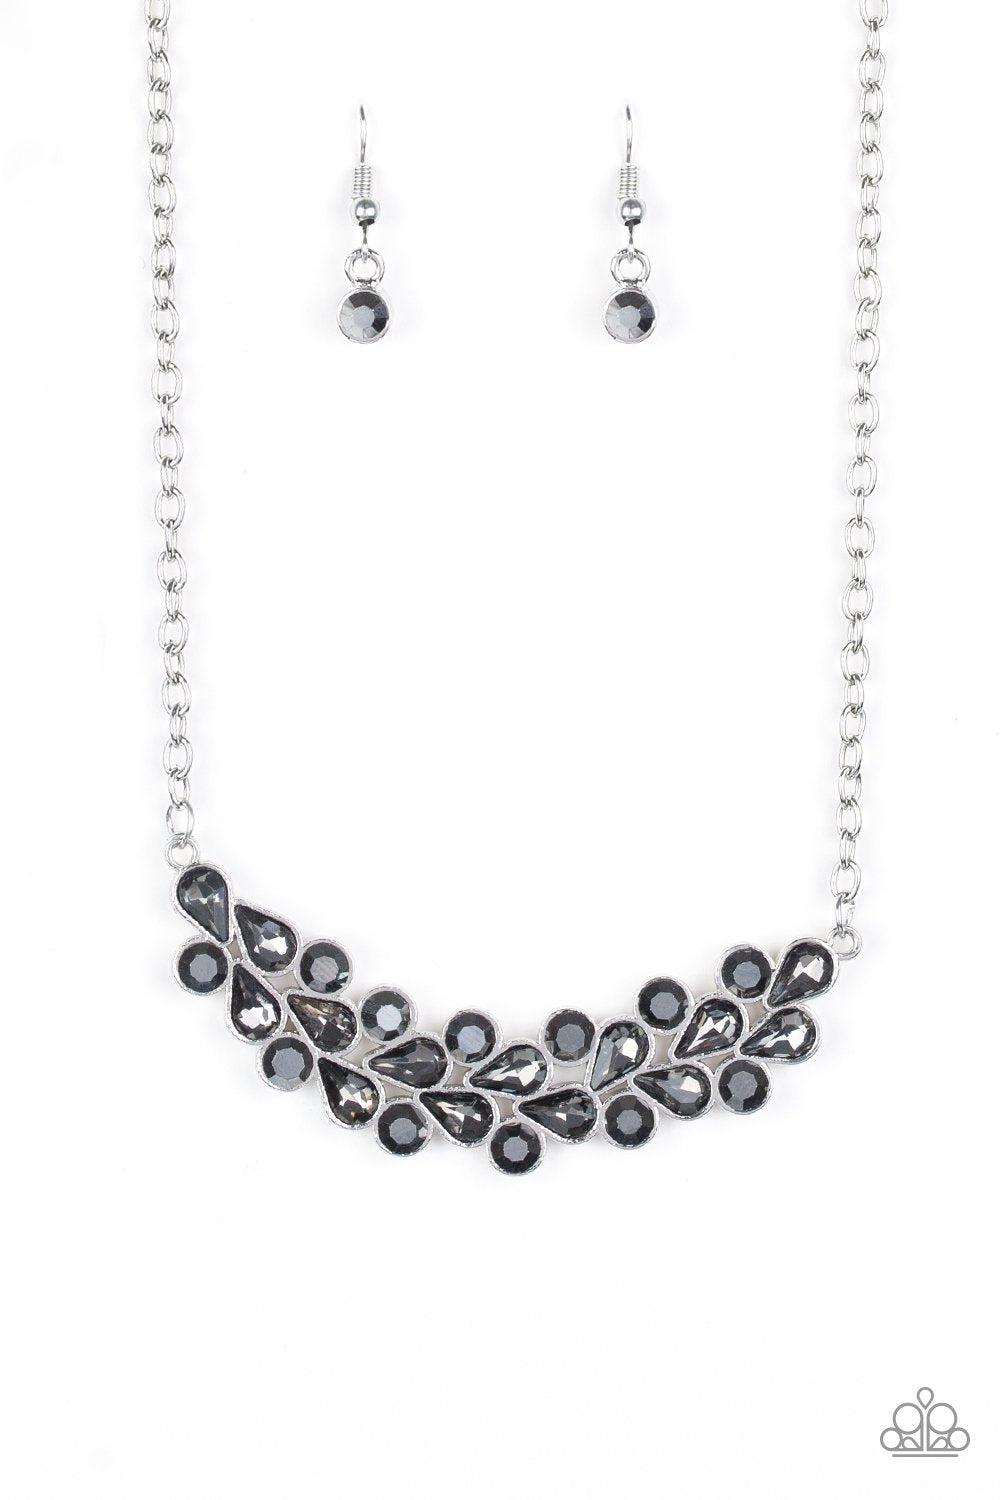 Special Treatment Silver, Hematite and Smoky Rhinestone Necklace - Paparazzi Accessories-CarasShop.com - $5 Jewelry by Cara Jewels